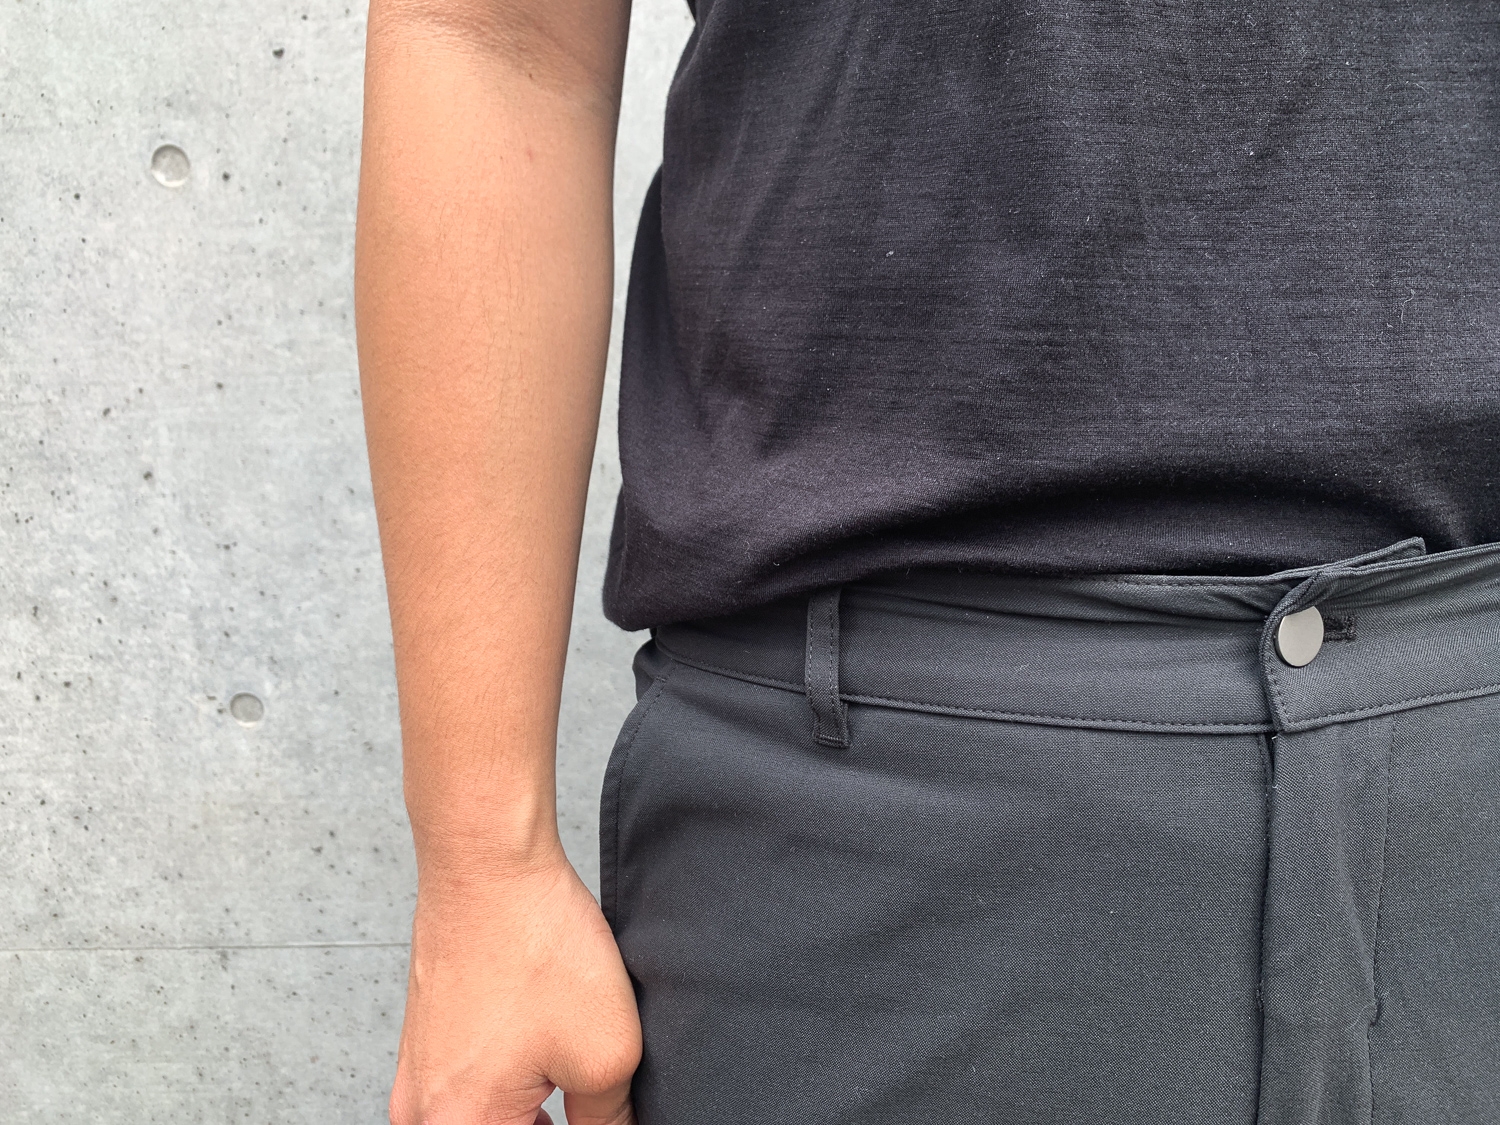 The Outlier Futureworks is more charcoal than black.